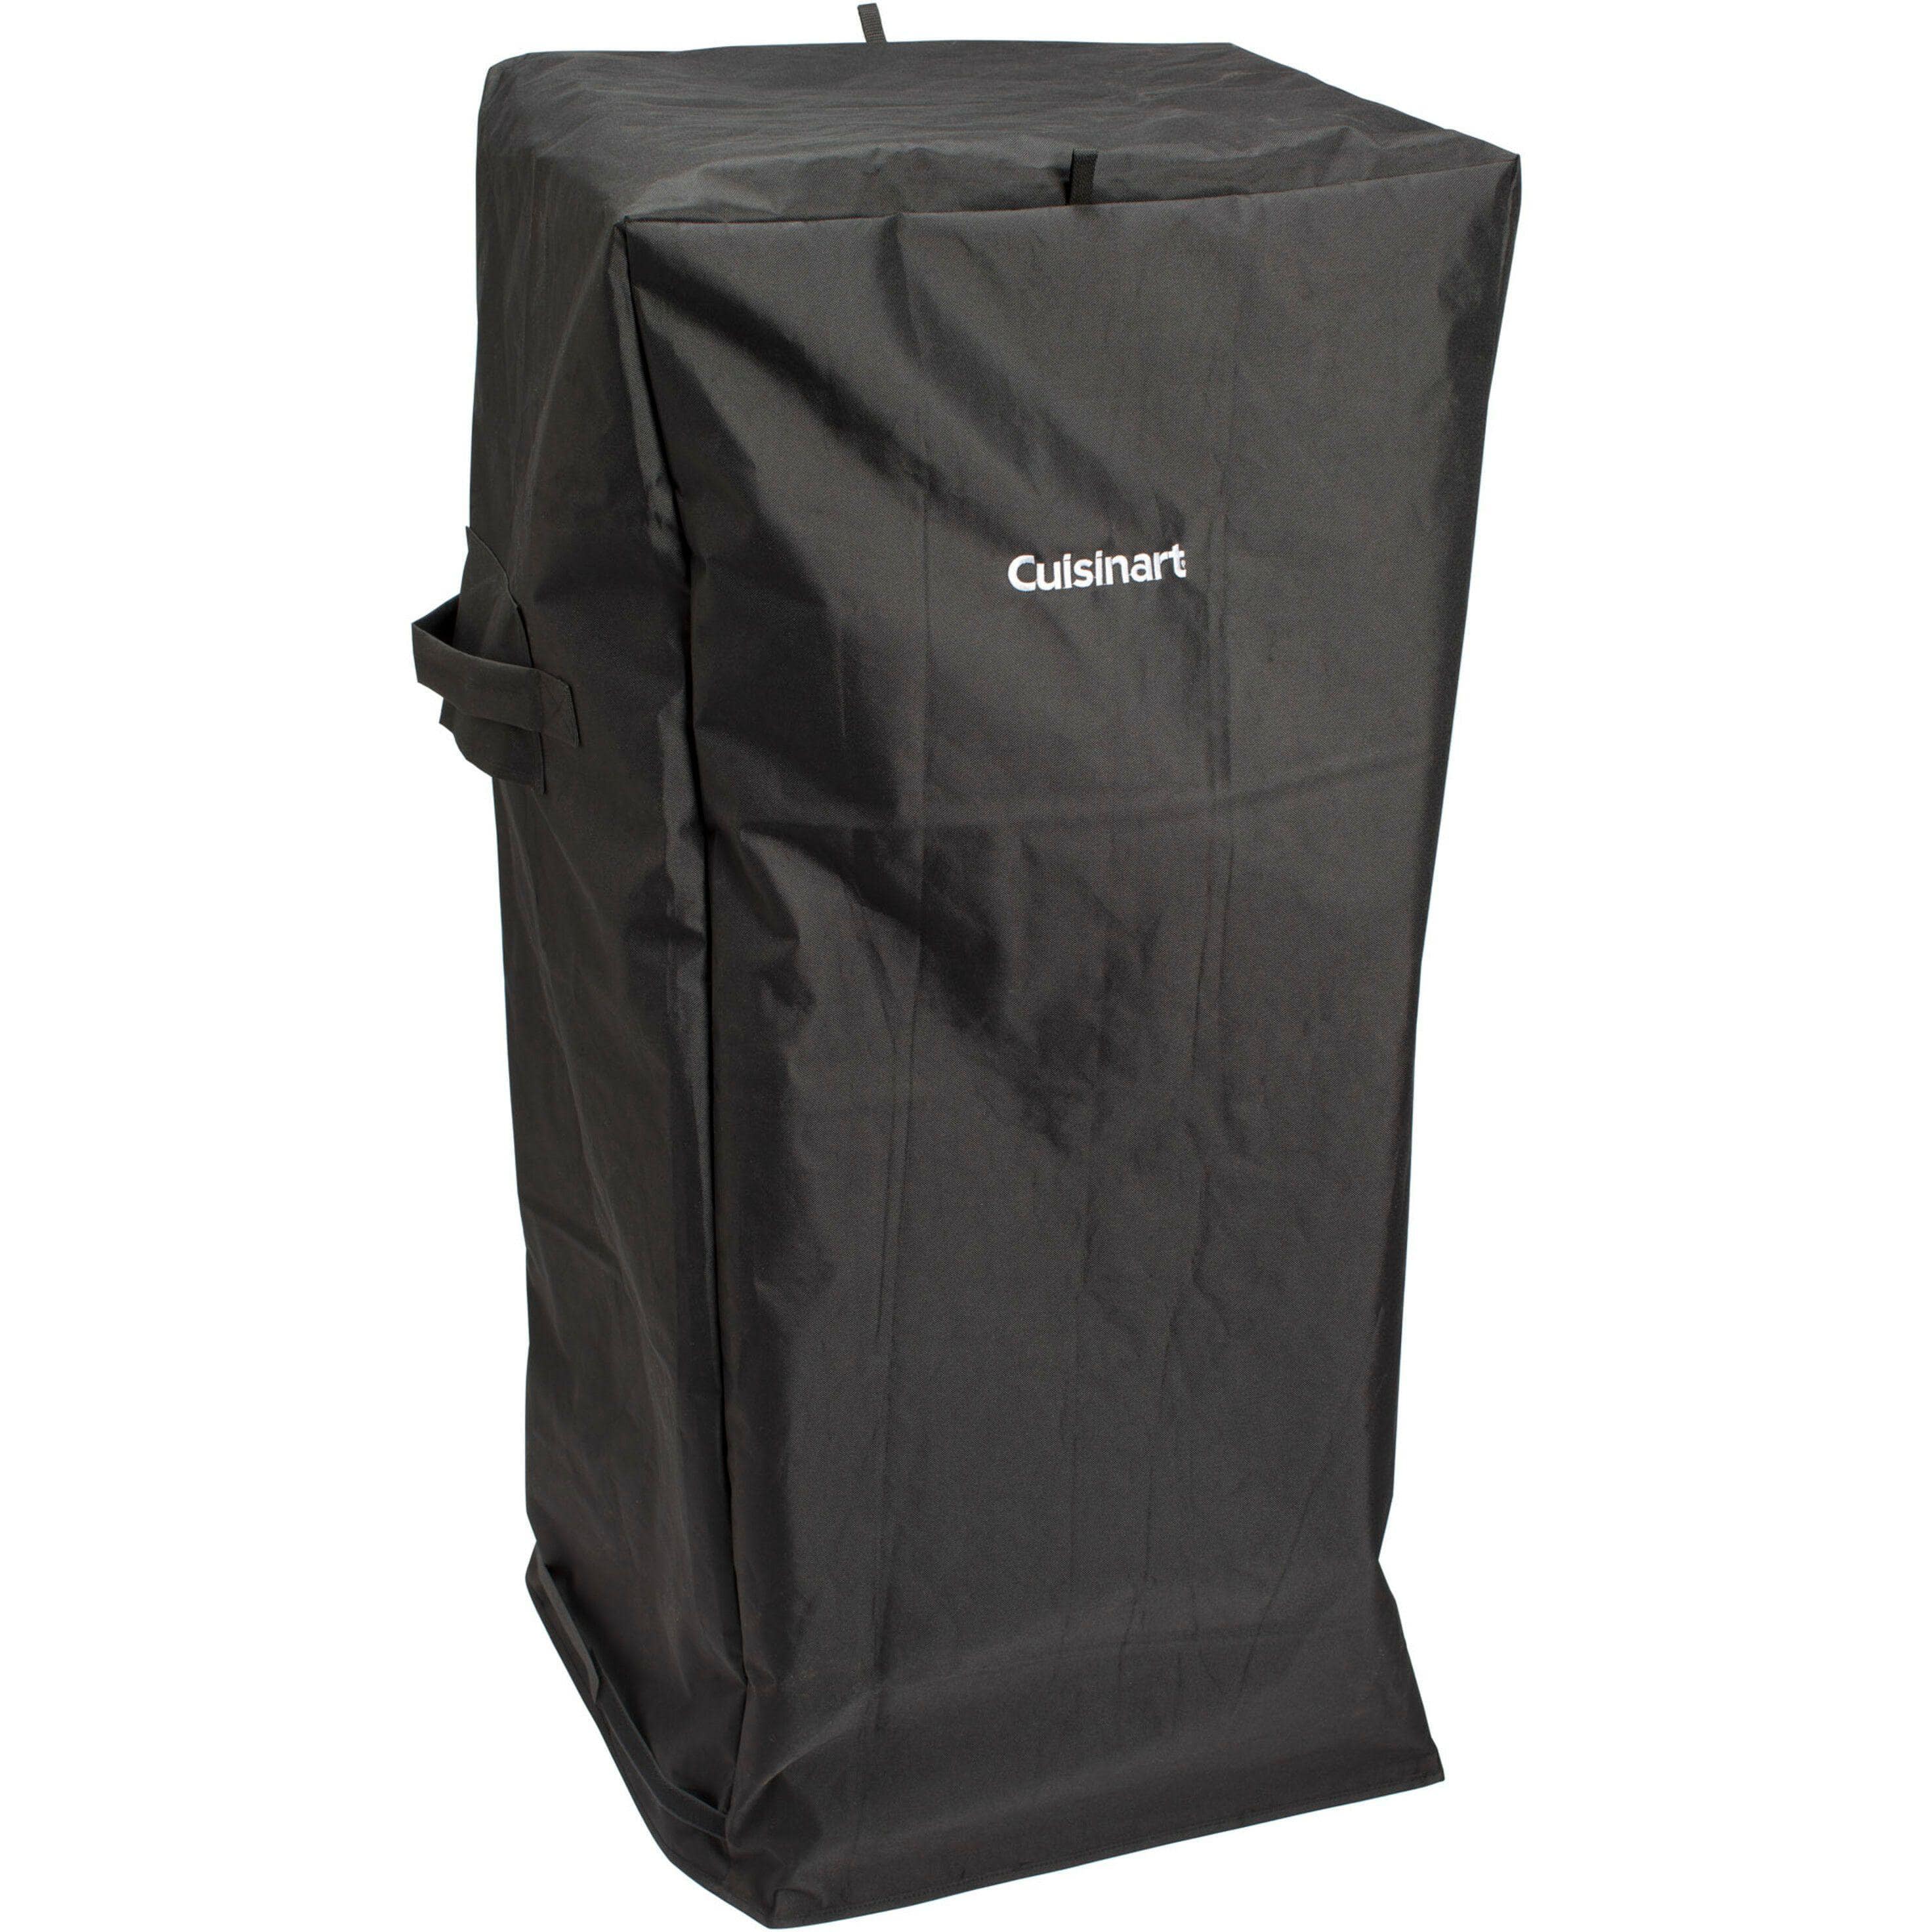 Cuisinart Cuisinart Protective Cover for 36-In. Vertical Smoker